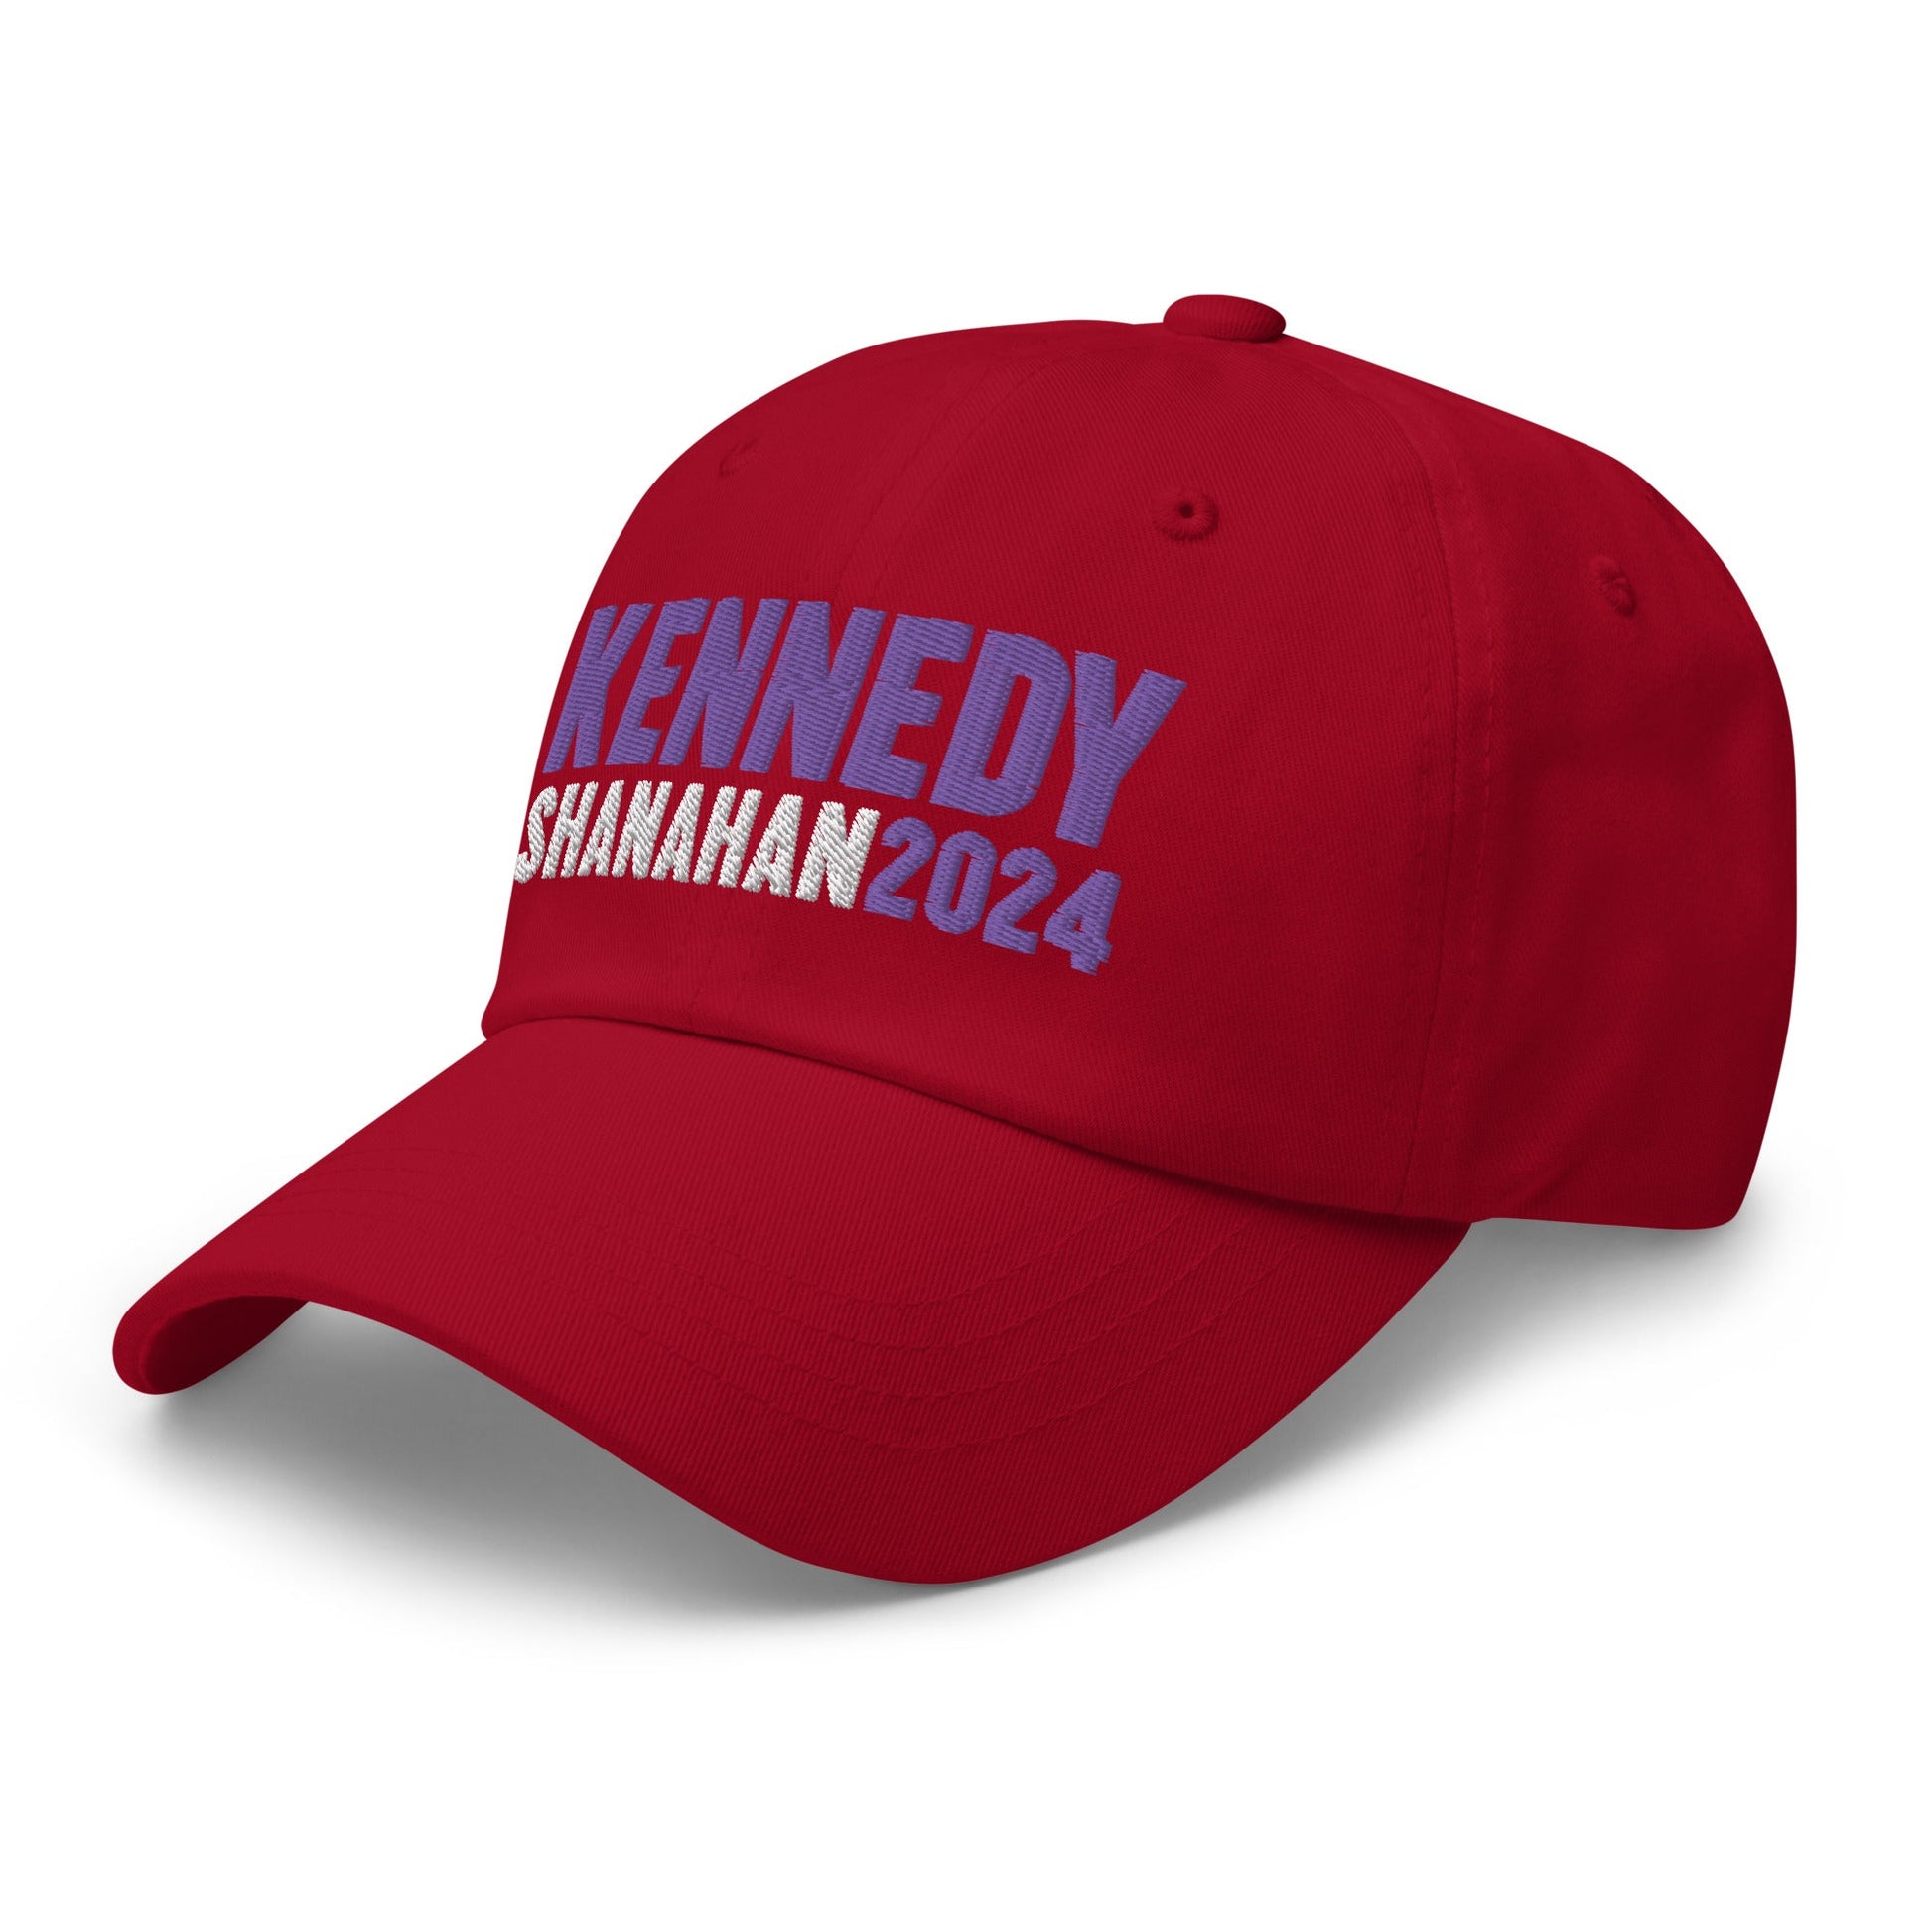 Kennedy X Shanahan II Hat - TEAM KENNEDY. All rights reserved